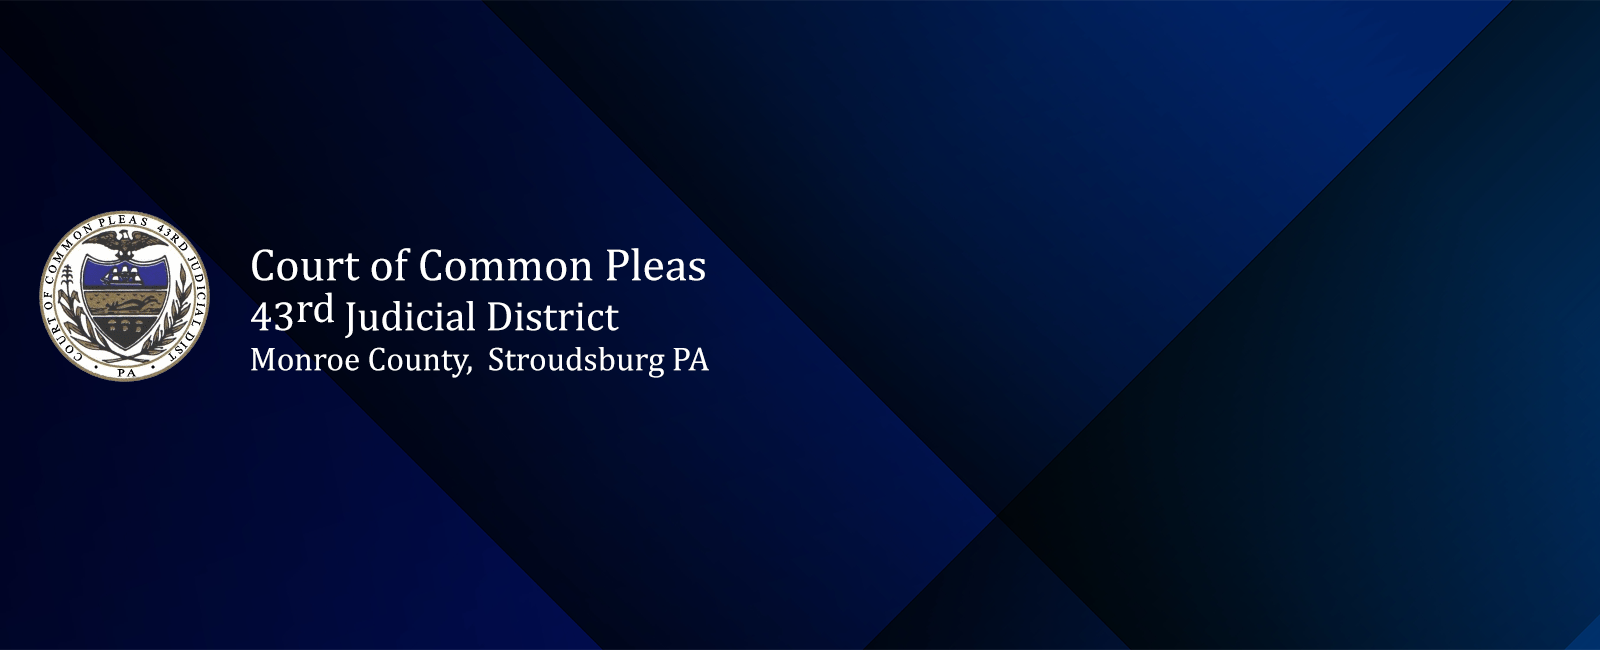 Welcome to 43rd Judicial Court of Common Pleas